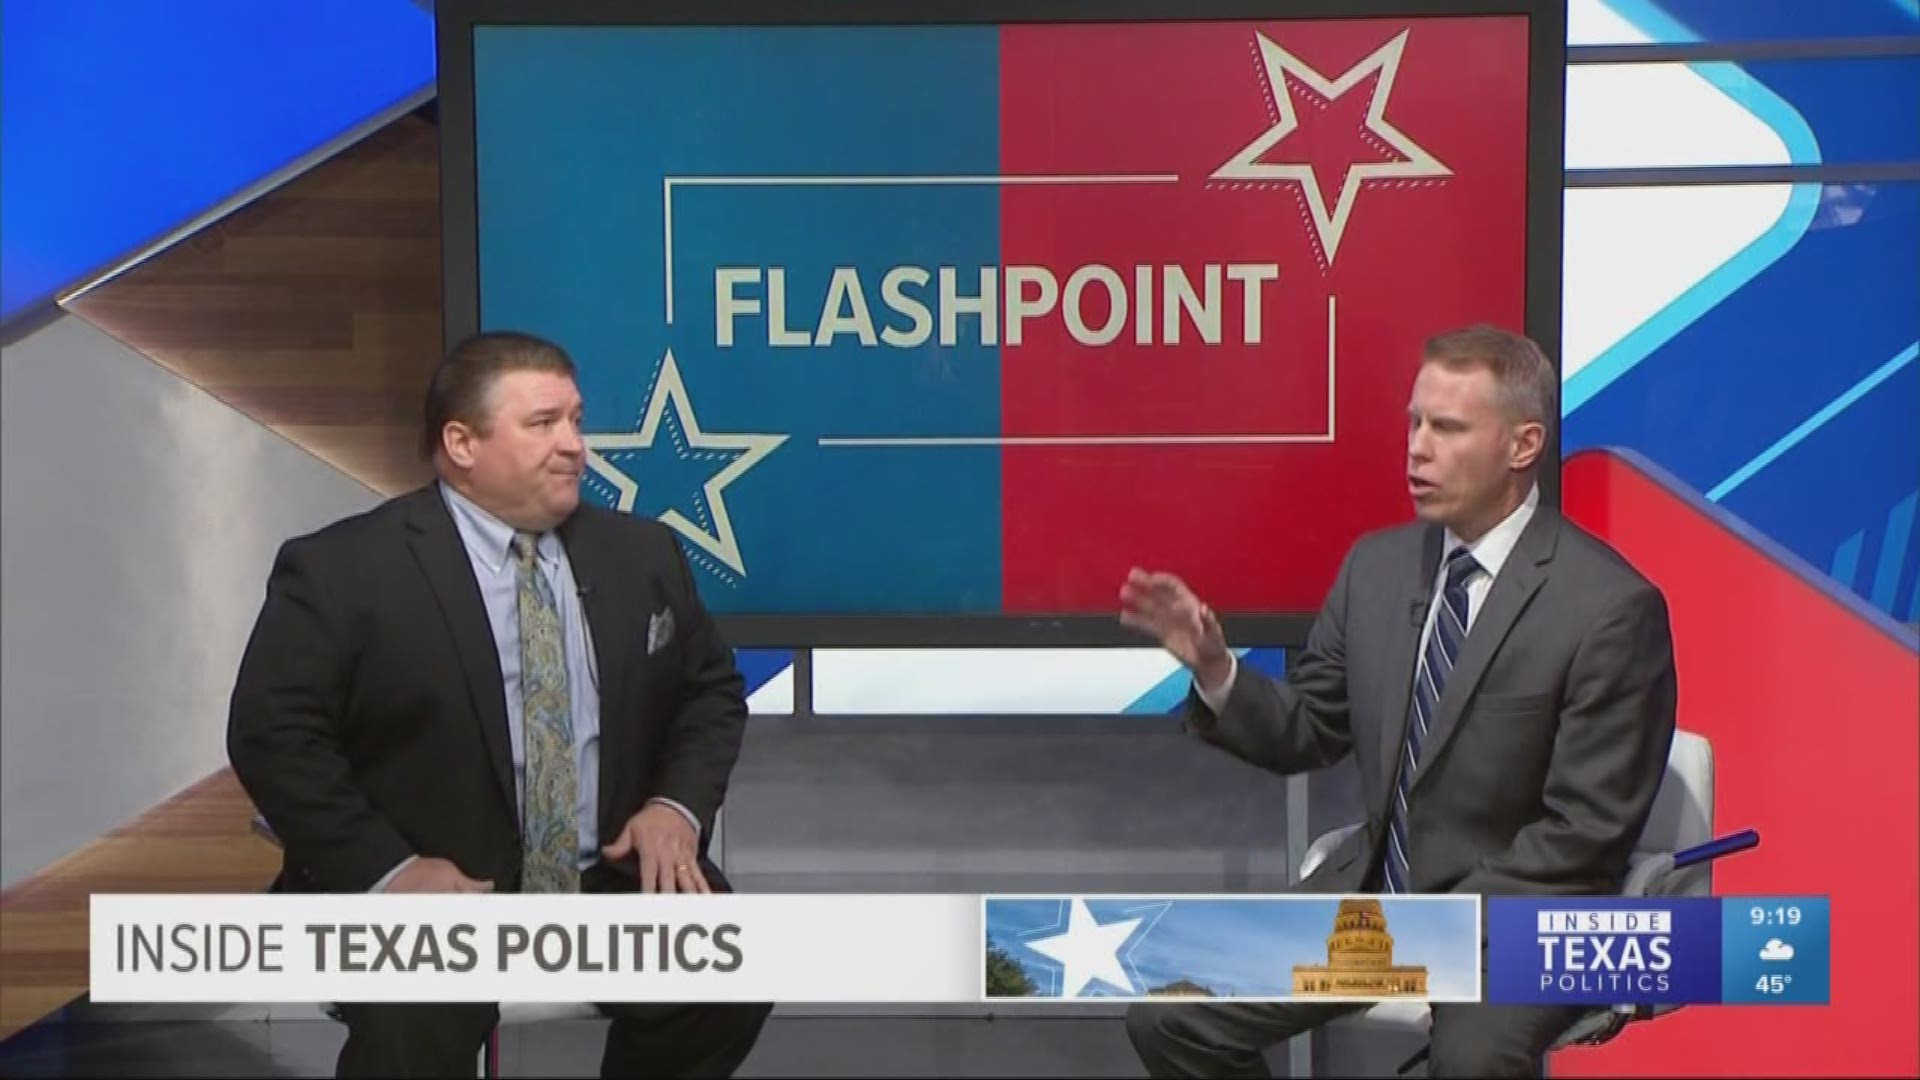 In Flashpoint’s last debate of 2019, we take a look forward to the new year and new elections.